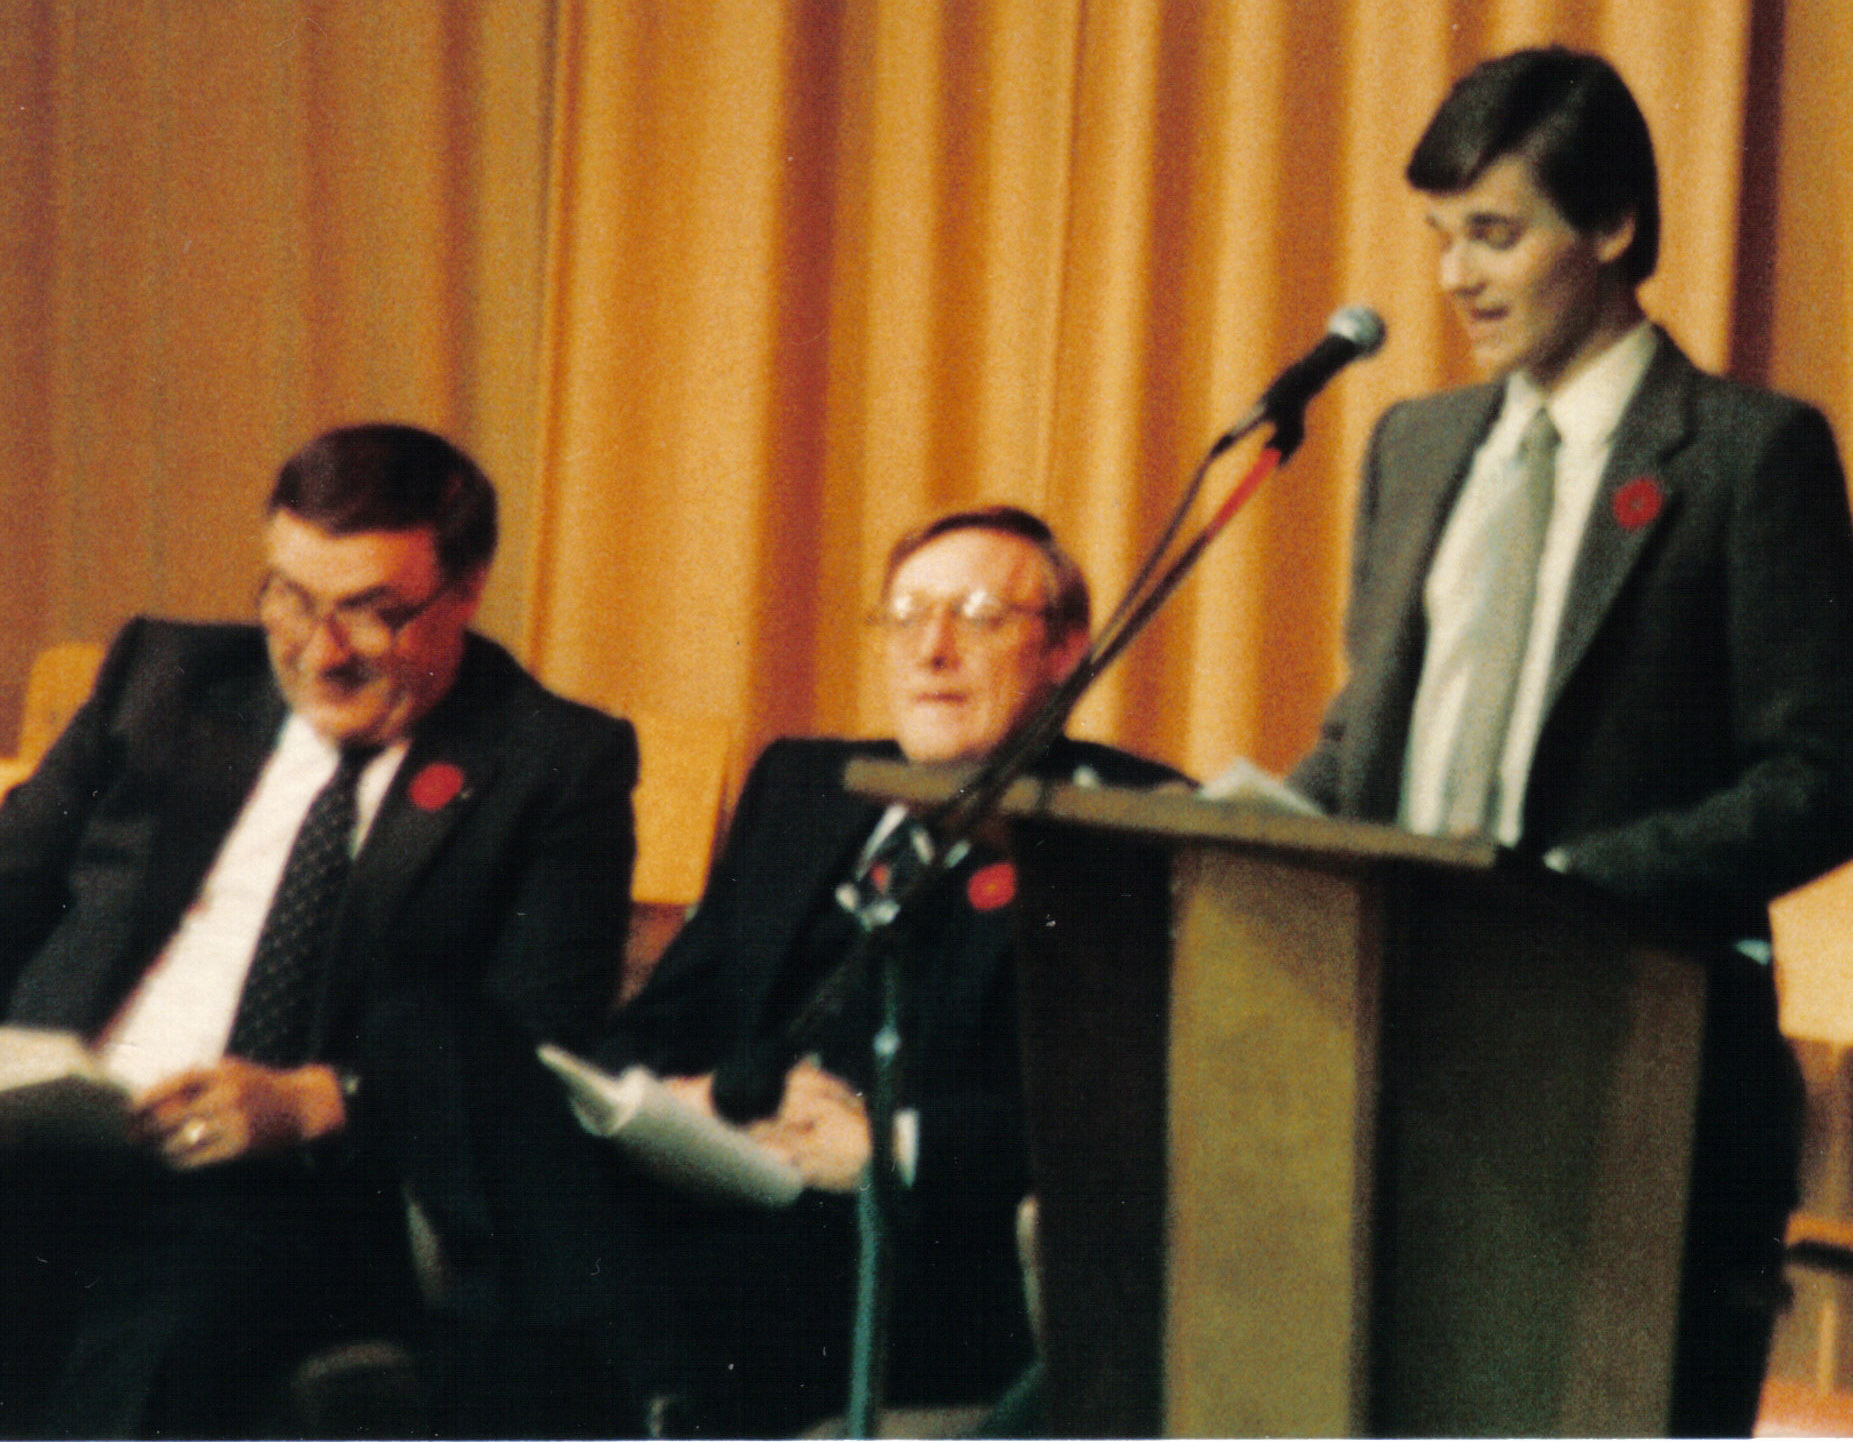 Andy Pateman - 1982 commencement valedictorian; middle - Principal Dave Brown; far left - Ray Newton (?)